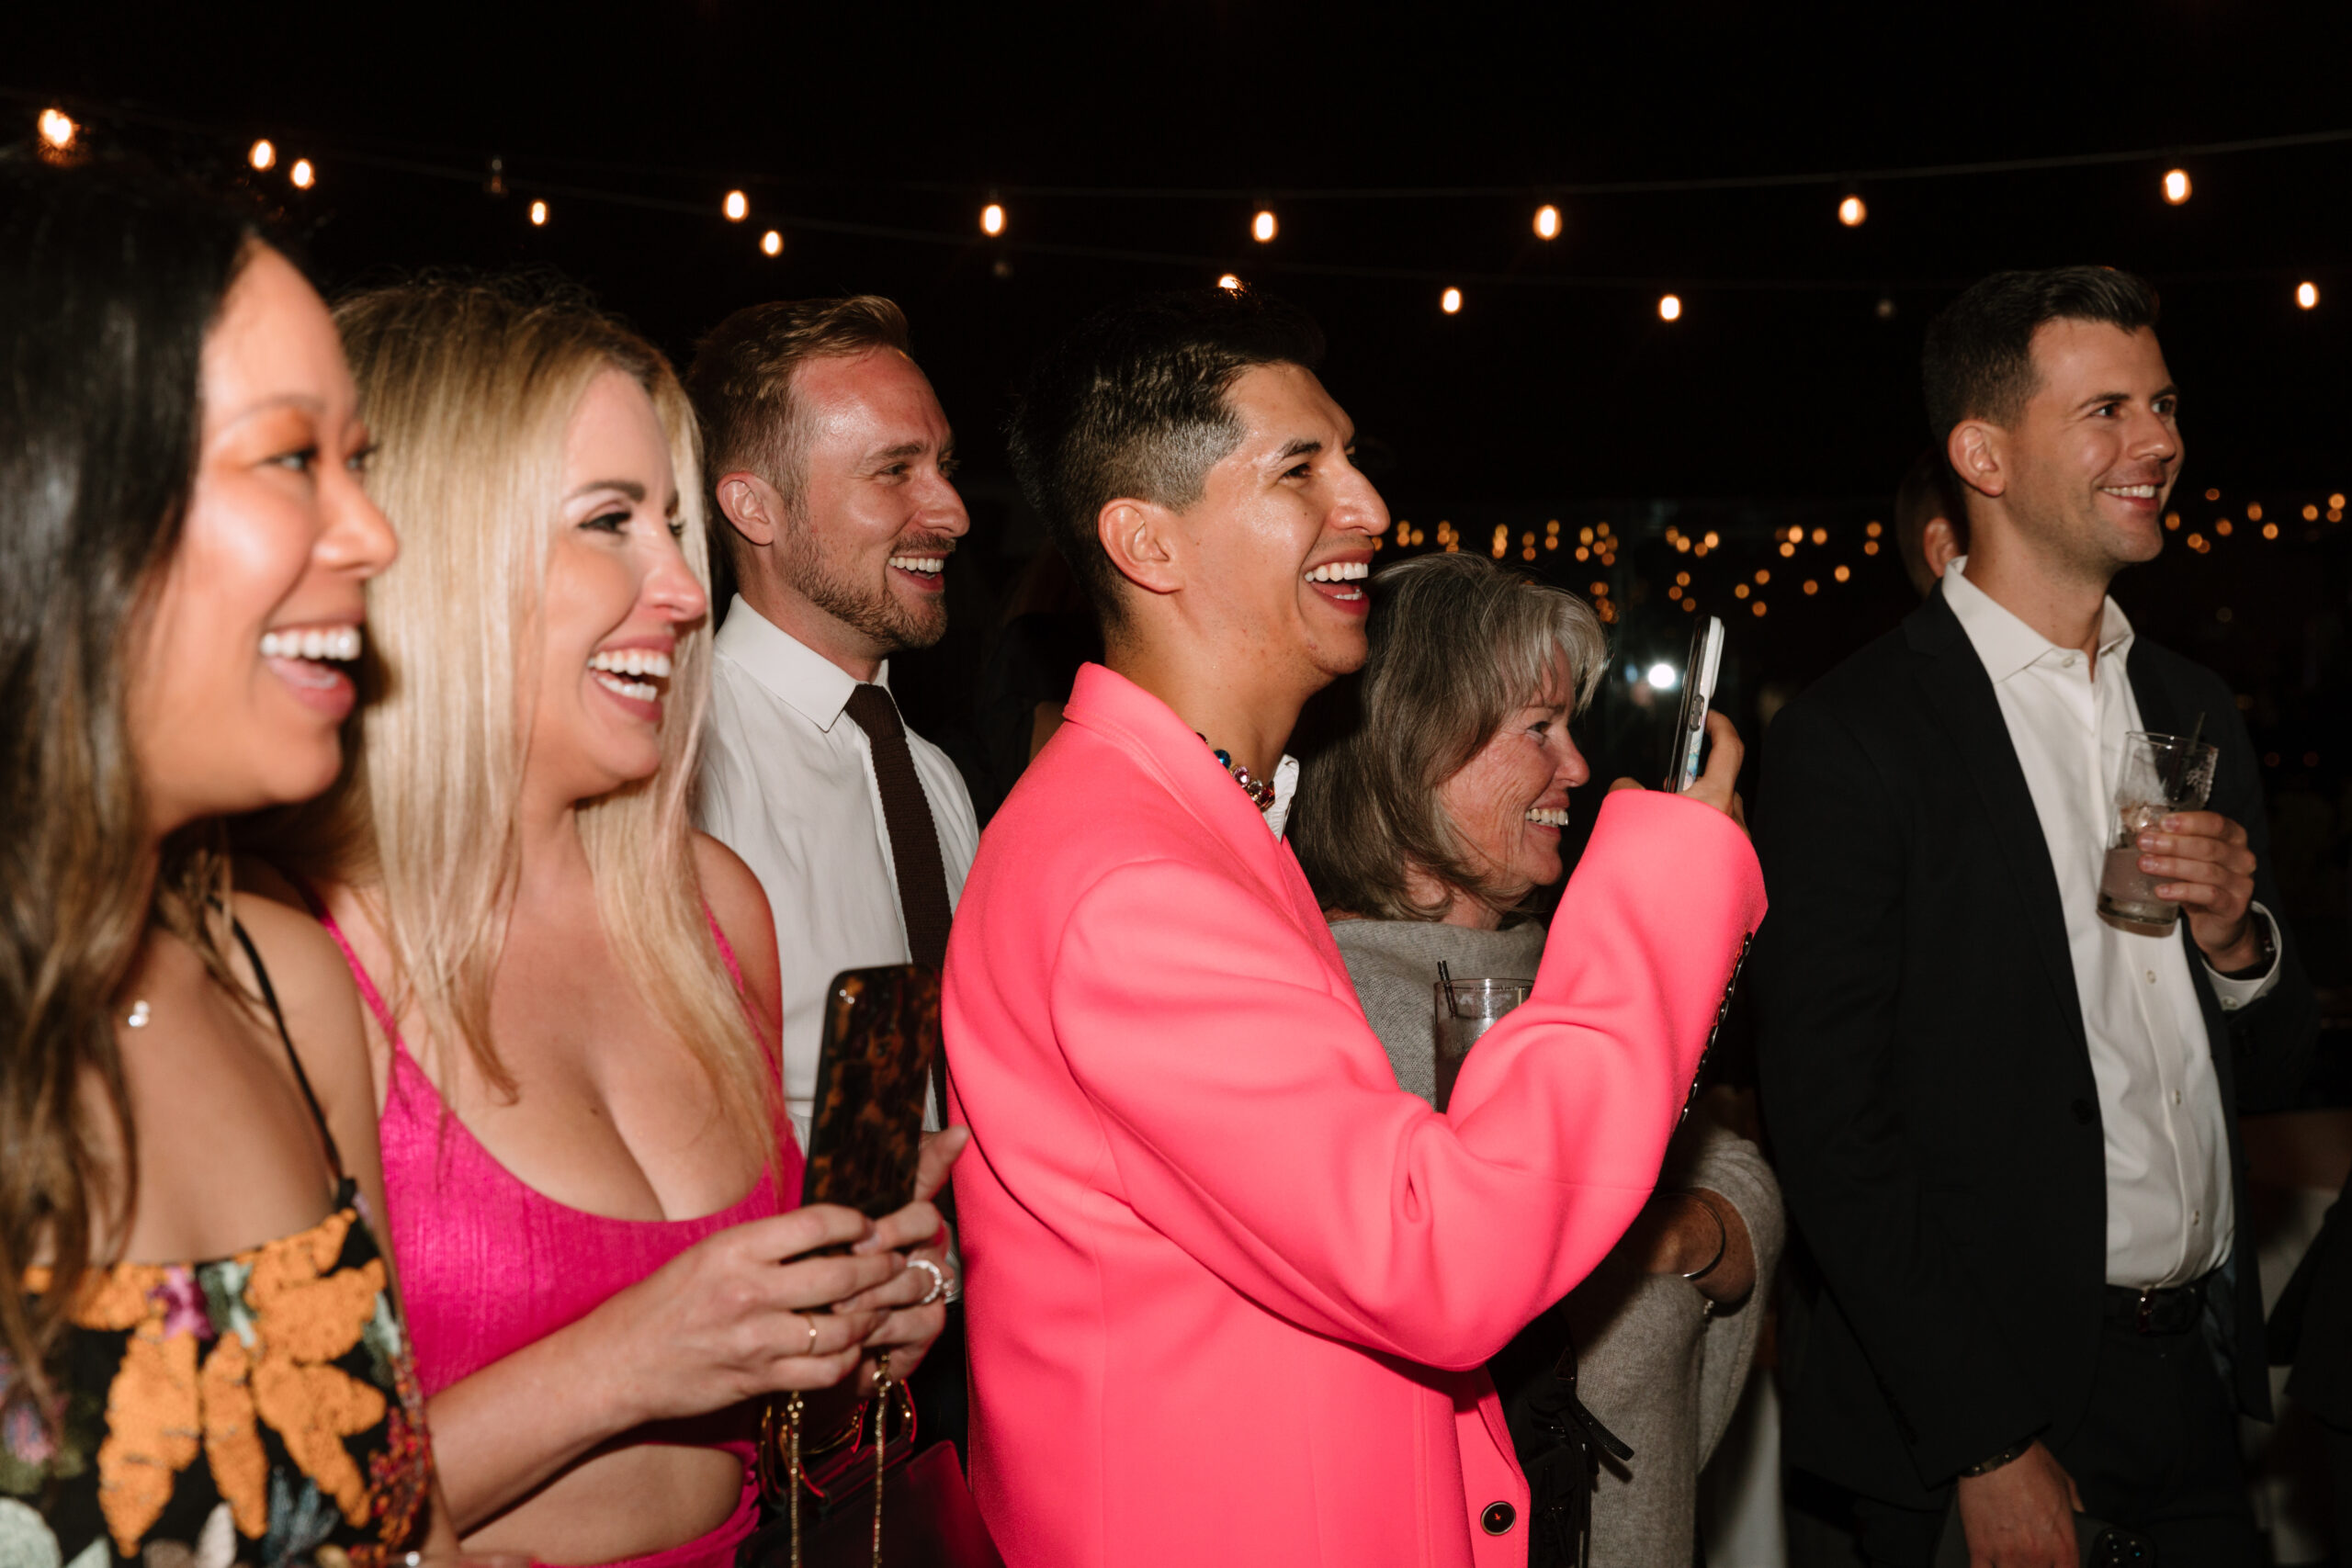 direct flash photo of guests in bright pink smiling and taking pictures on their phones